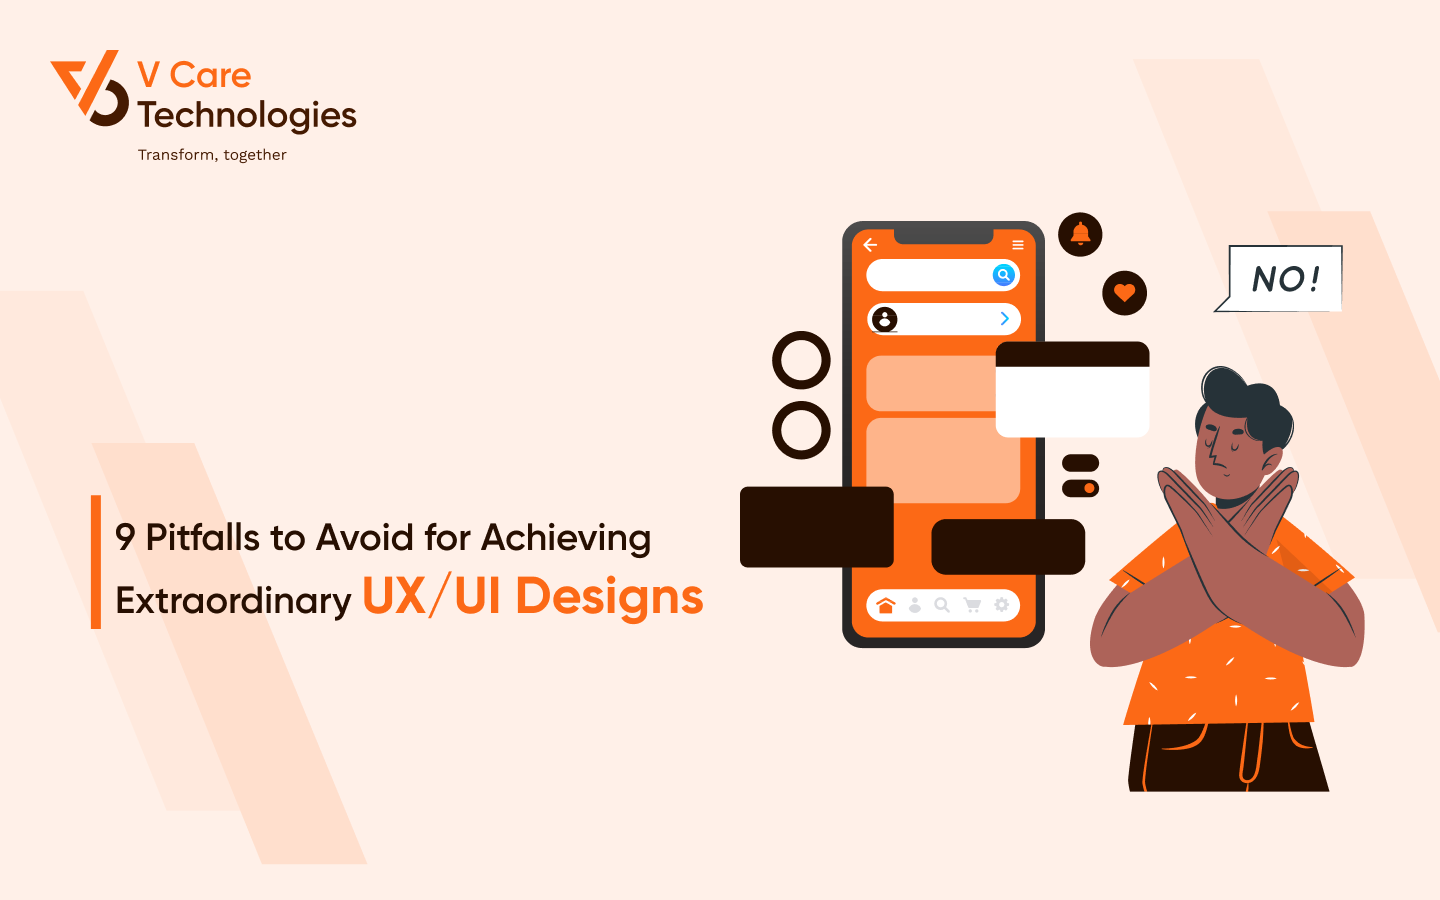 9 Pitfalls to Avoid for Achieving Extraordinary UX/UI Designs